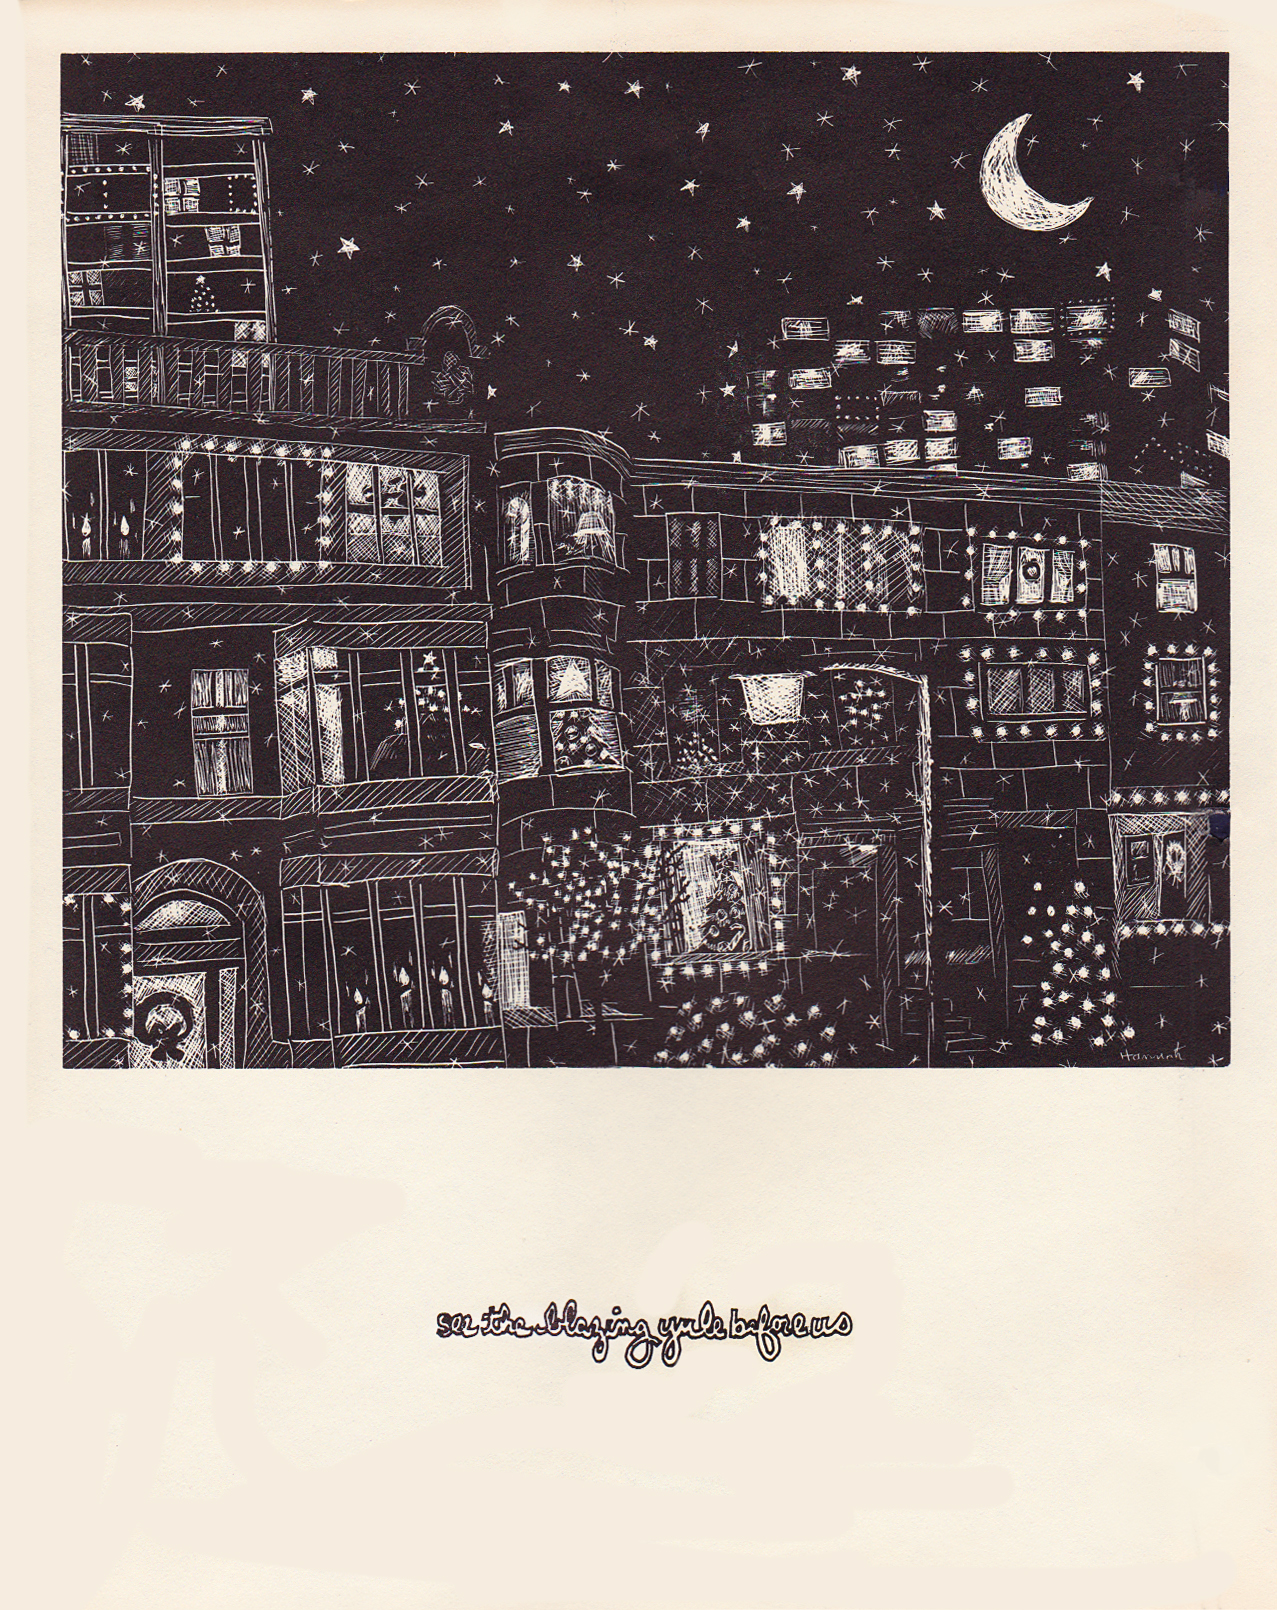 Scratch board illustration of city buildings under a moon and stars